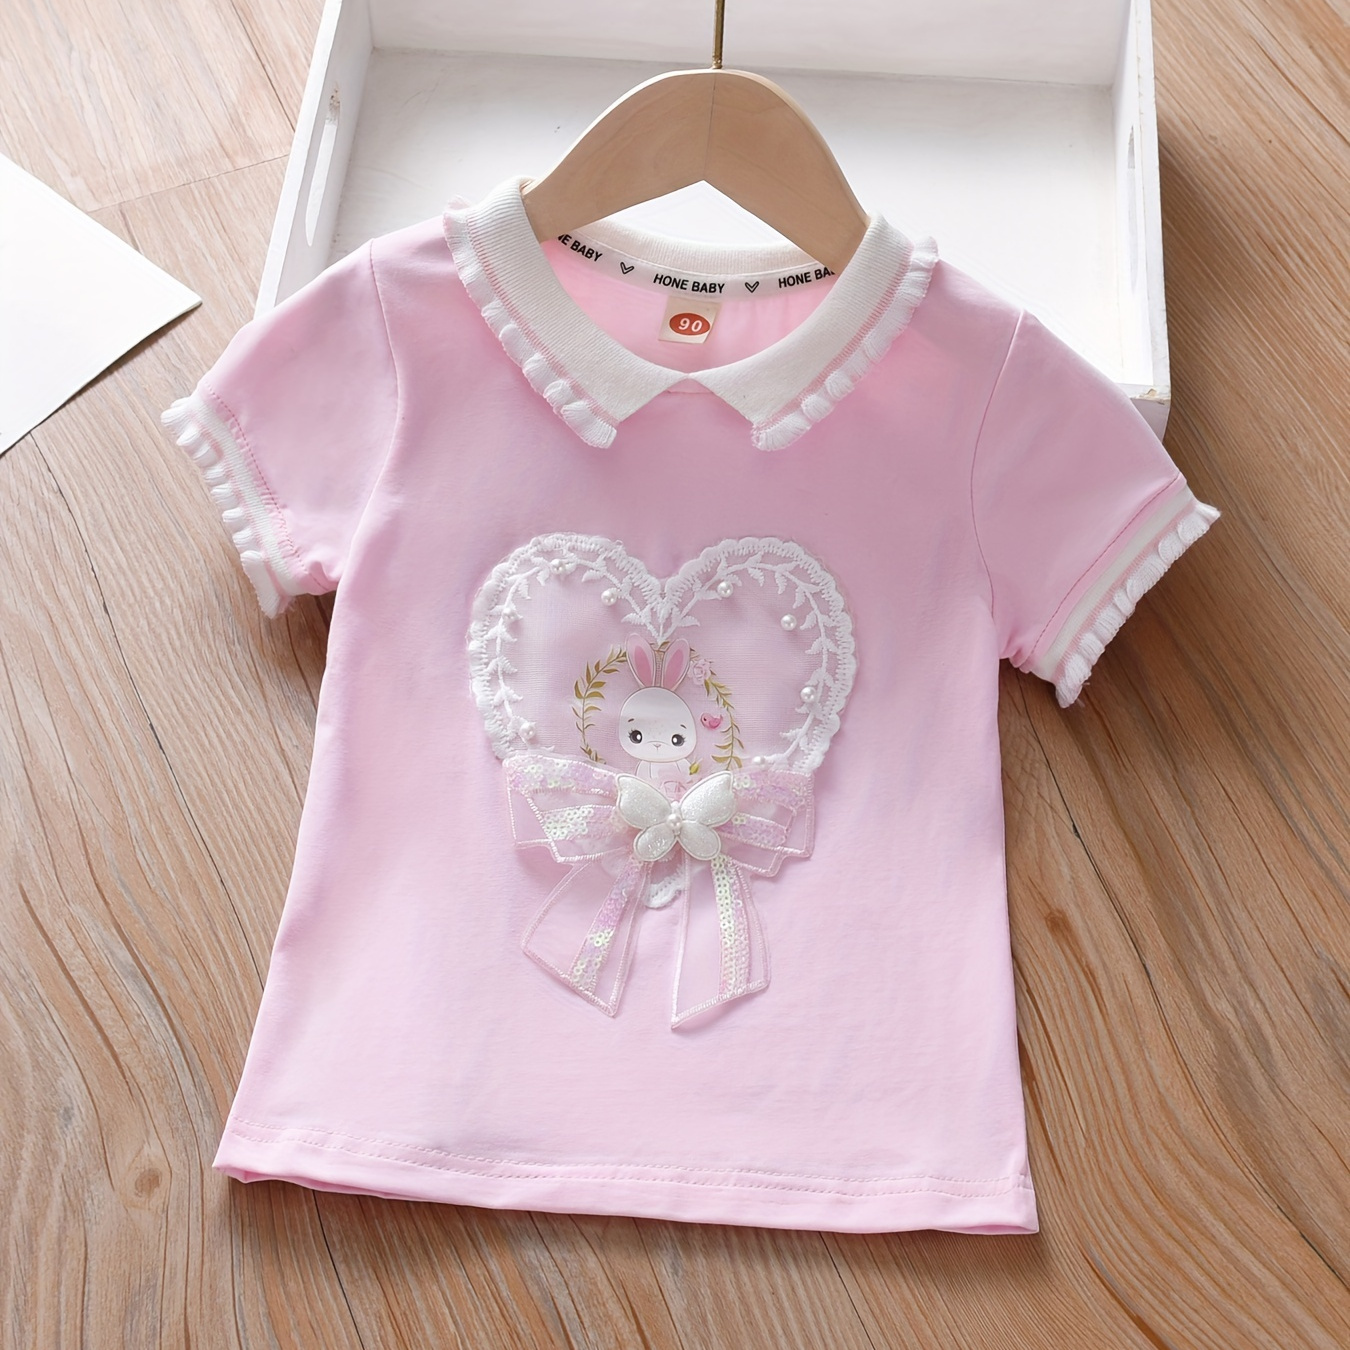 

Cute Girls T-shirt Soft Cotton Elaborate Embroidery Cartoon Bunny Graphic Tees Breathable Comfy Top Kids Play Wear Clothes Summer